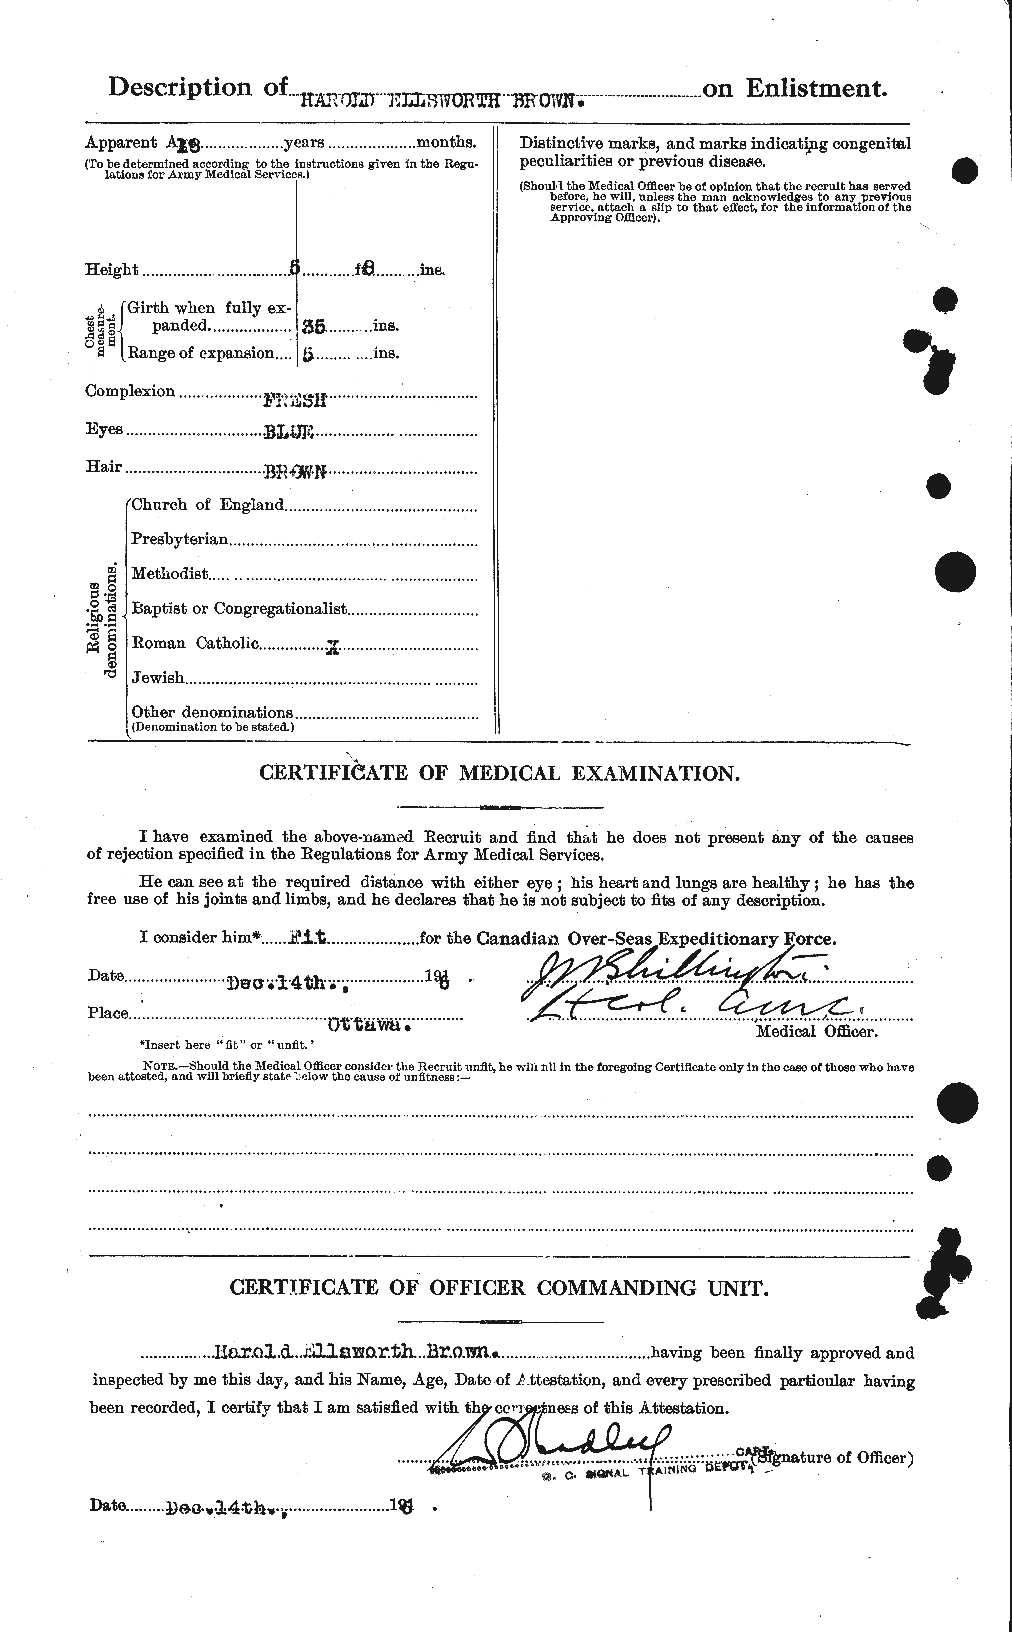 Personnel Records of the First World War - CEF 265354b